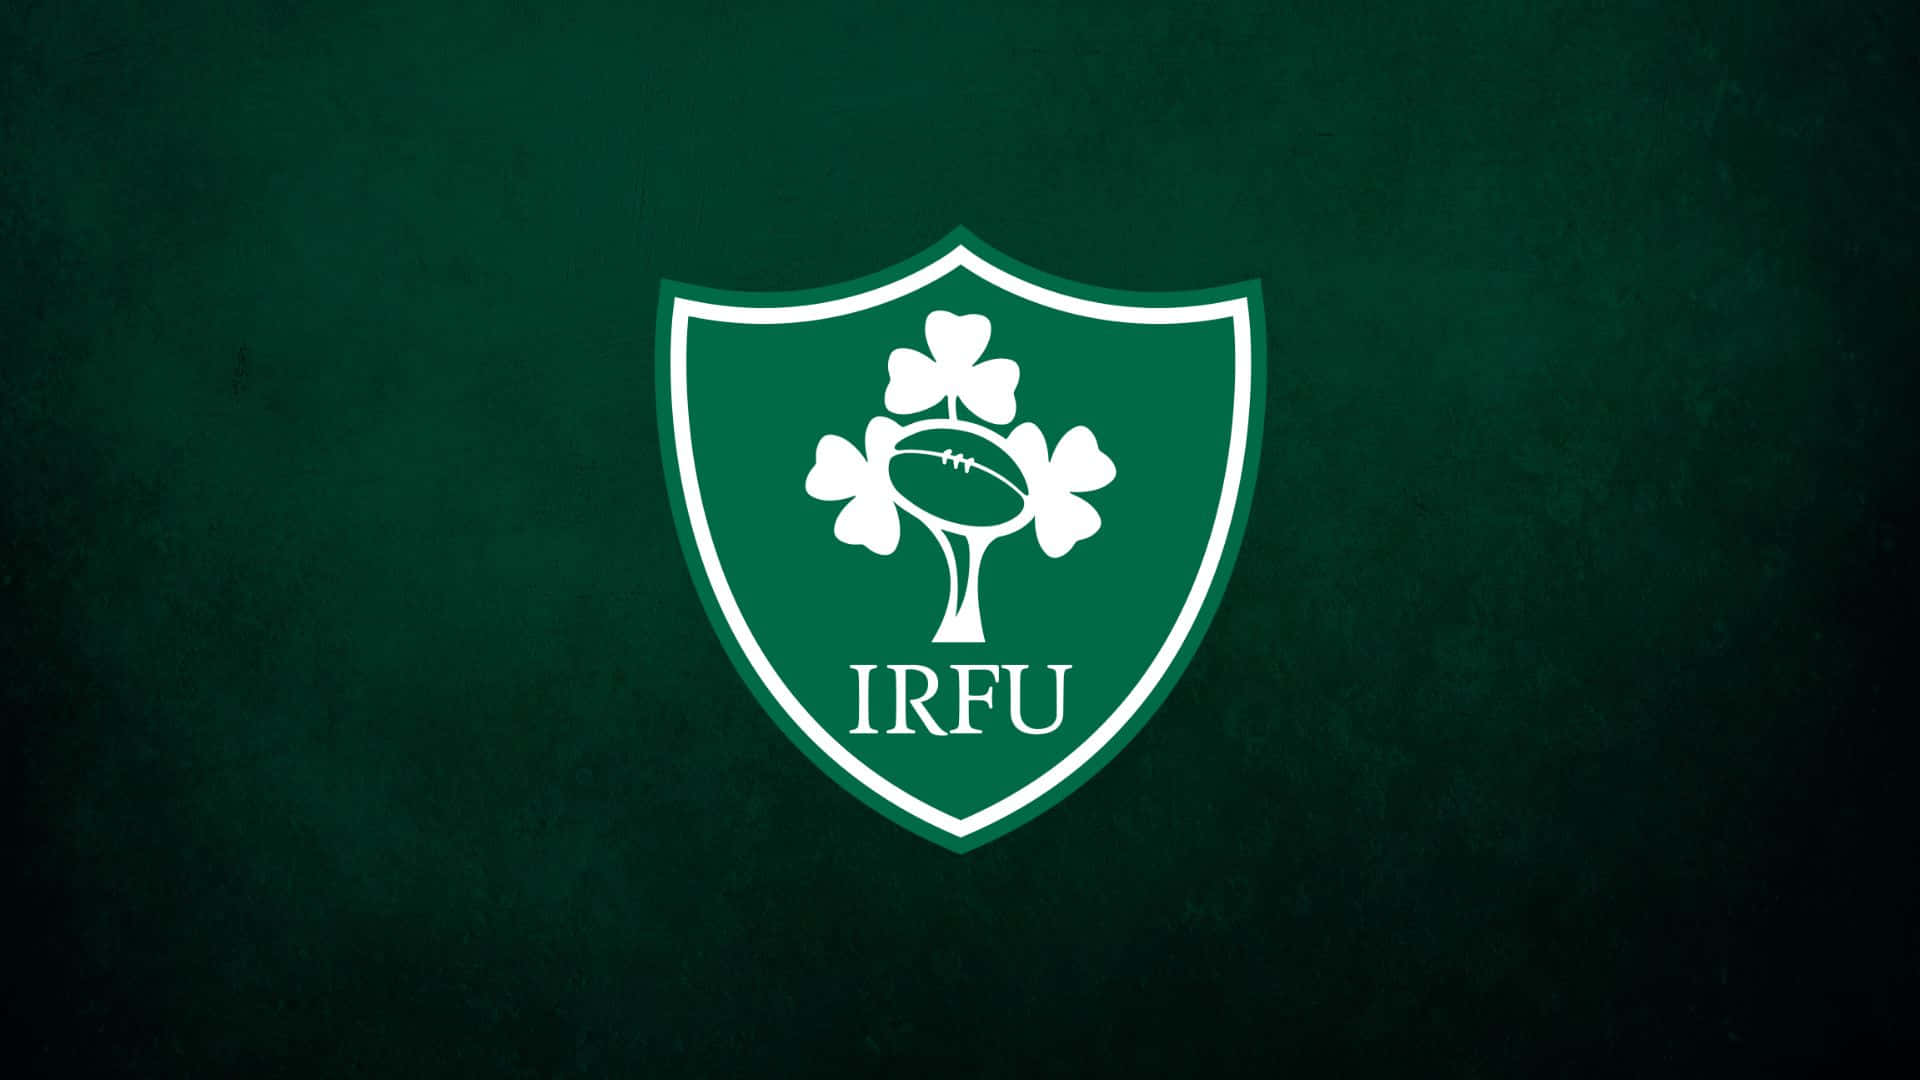 The Irish Rugby Team in Action during a game Wallpaper